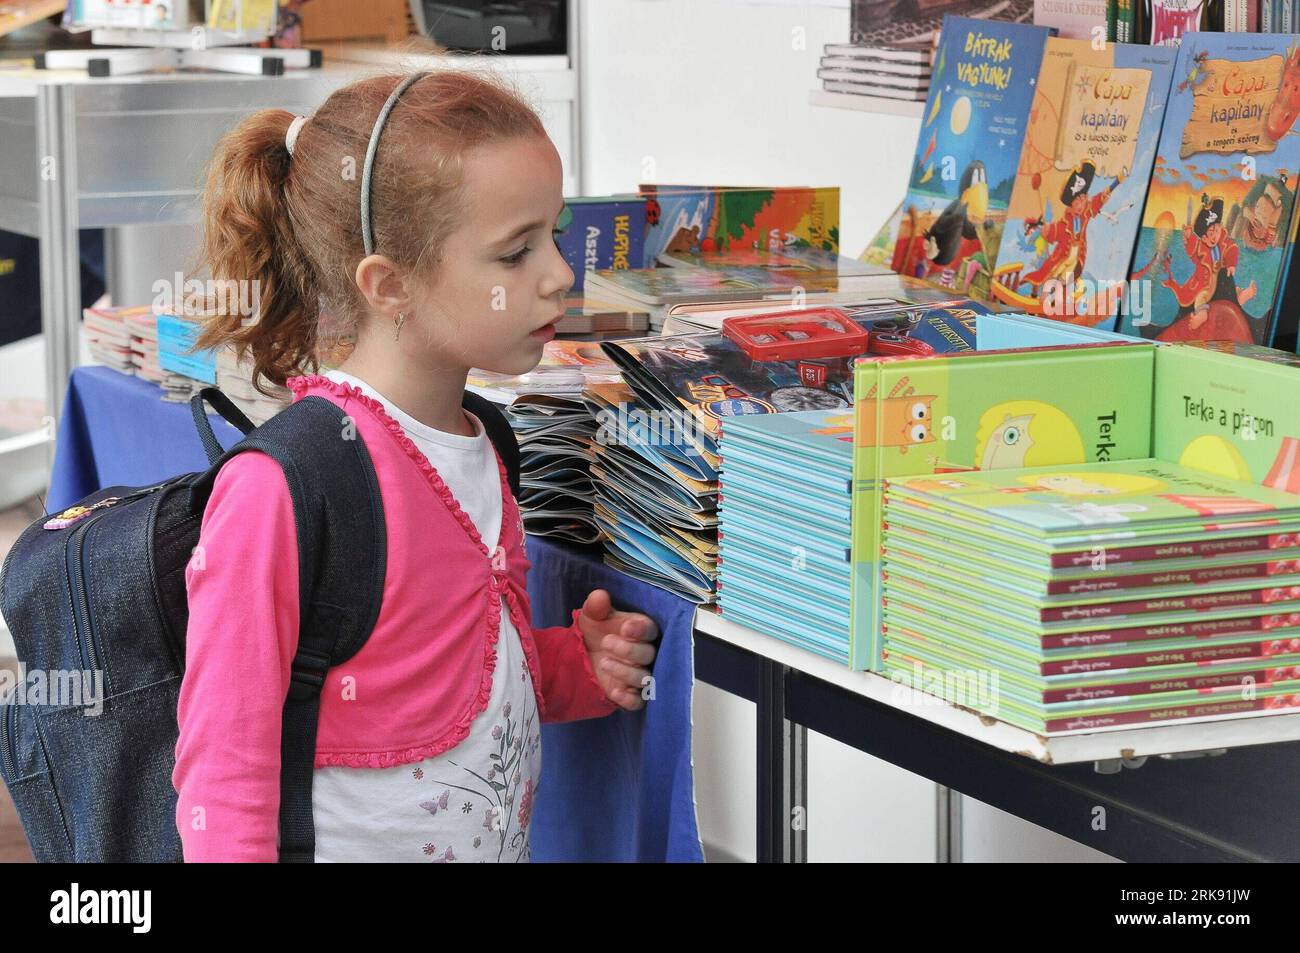 Bildnummer: 54105118  Datum: 03.06.2010  Copyright: imago/Xinhua (100603) -- BUDAPEST, June 3, 2010 (Xinhua) -- A girl looks at a book on the opening day of the 81st Book Festival held in the center of Budapest, capital of Hungary on June 3, 2010. The week-long Book Festival, firstly held in 1929, branded itself as the most traditional event of its kind in the country. (Xinhua/Dani Dorko) (zw) (2)HUNGARY-BUDAPEST-BOOK FESTIVAL PUBLICATIONxNOTxINxCHN Gesellschaft Bücherfestival Bücher Festivals Premiumd xint kbdig xub 2010 quer o0 Buchfestival, Mädchen, Kind    Bildnummer 54105118 Date 03 06 20 Stock Photo